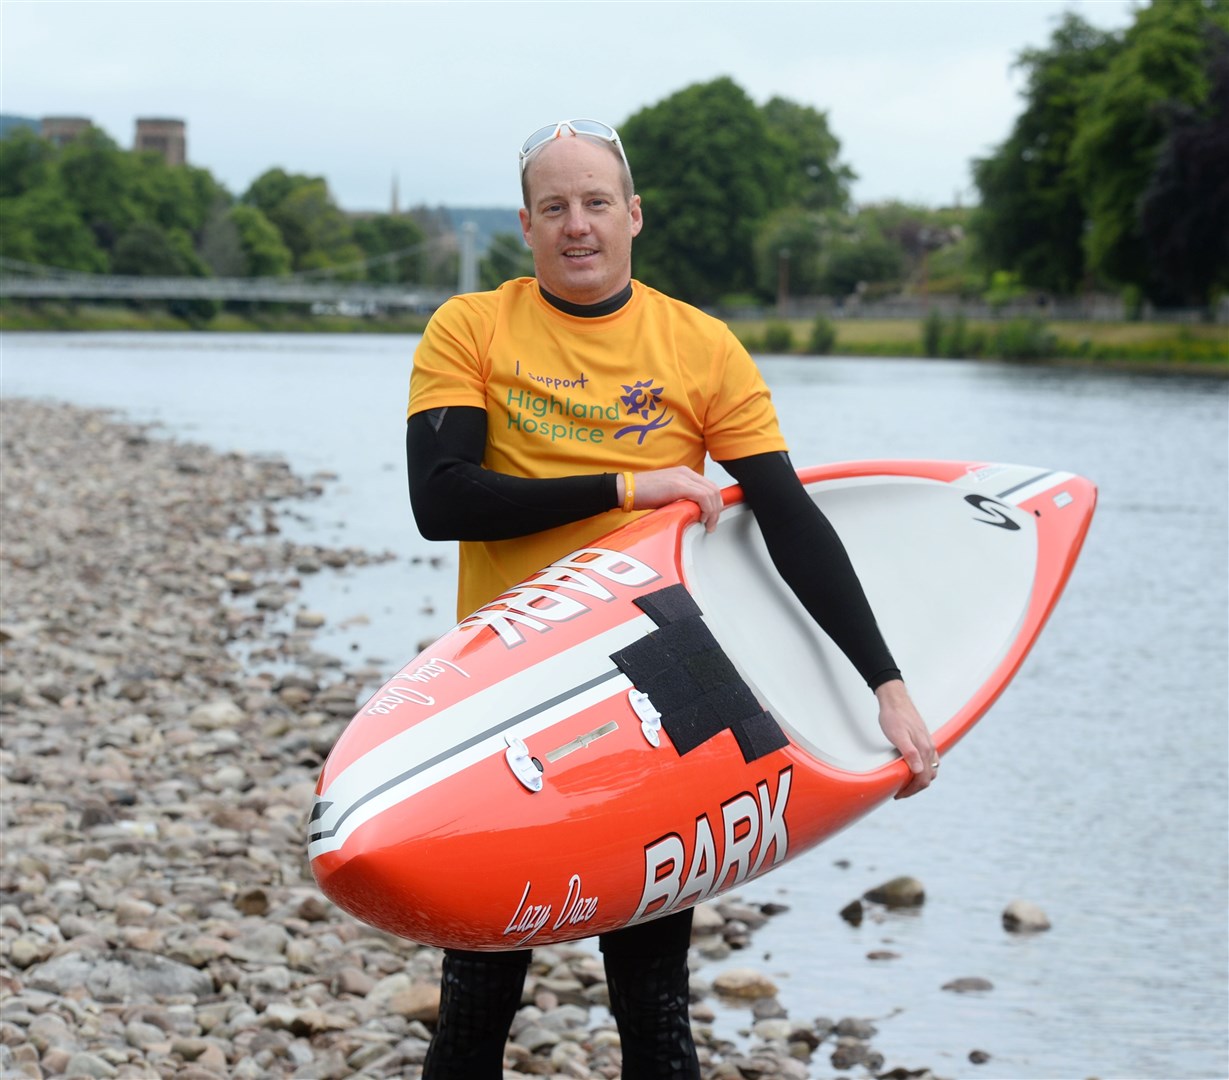 James Fletcher has already set a record for crossing Loch Ness.